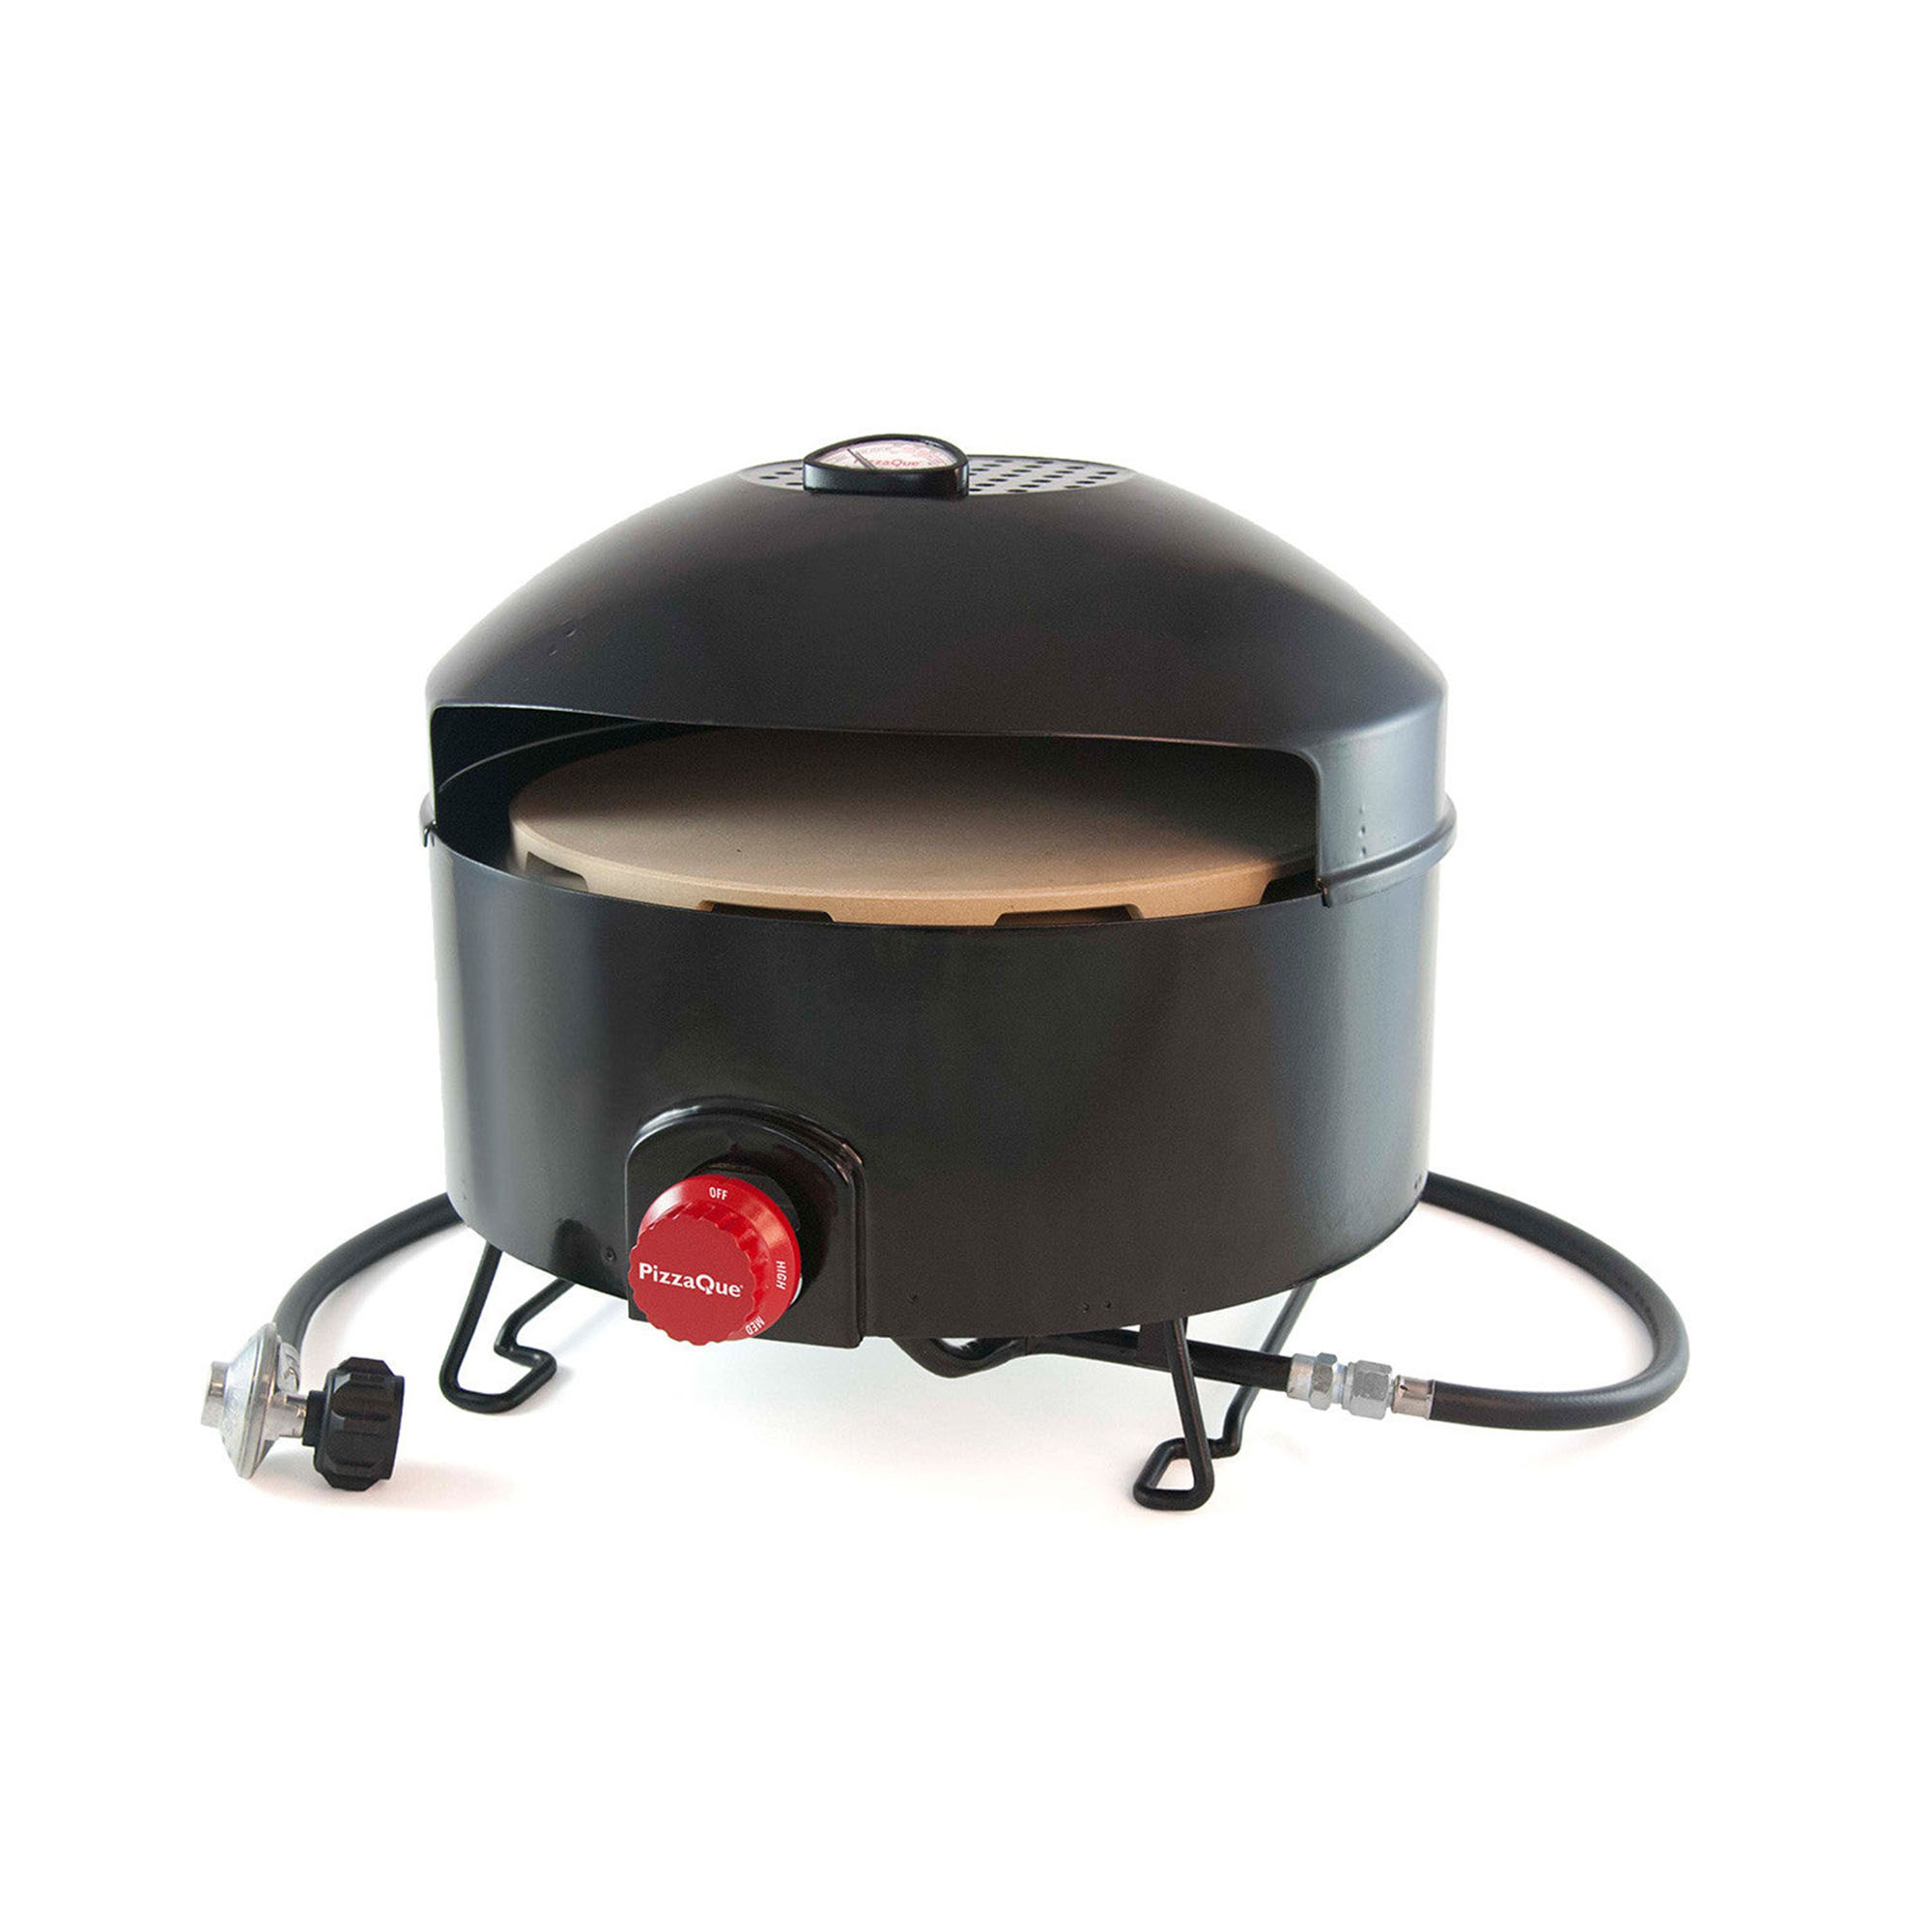 Pizzacraft PC6500 PizzaQue Portable Outdoor Pizza Oven - image 1 of 9